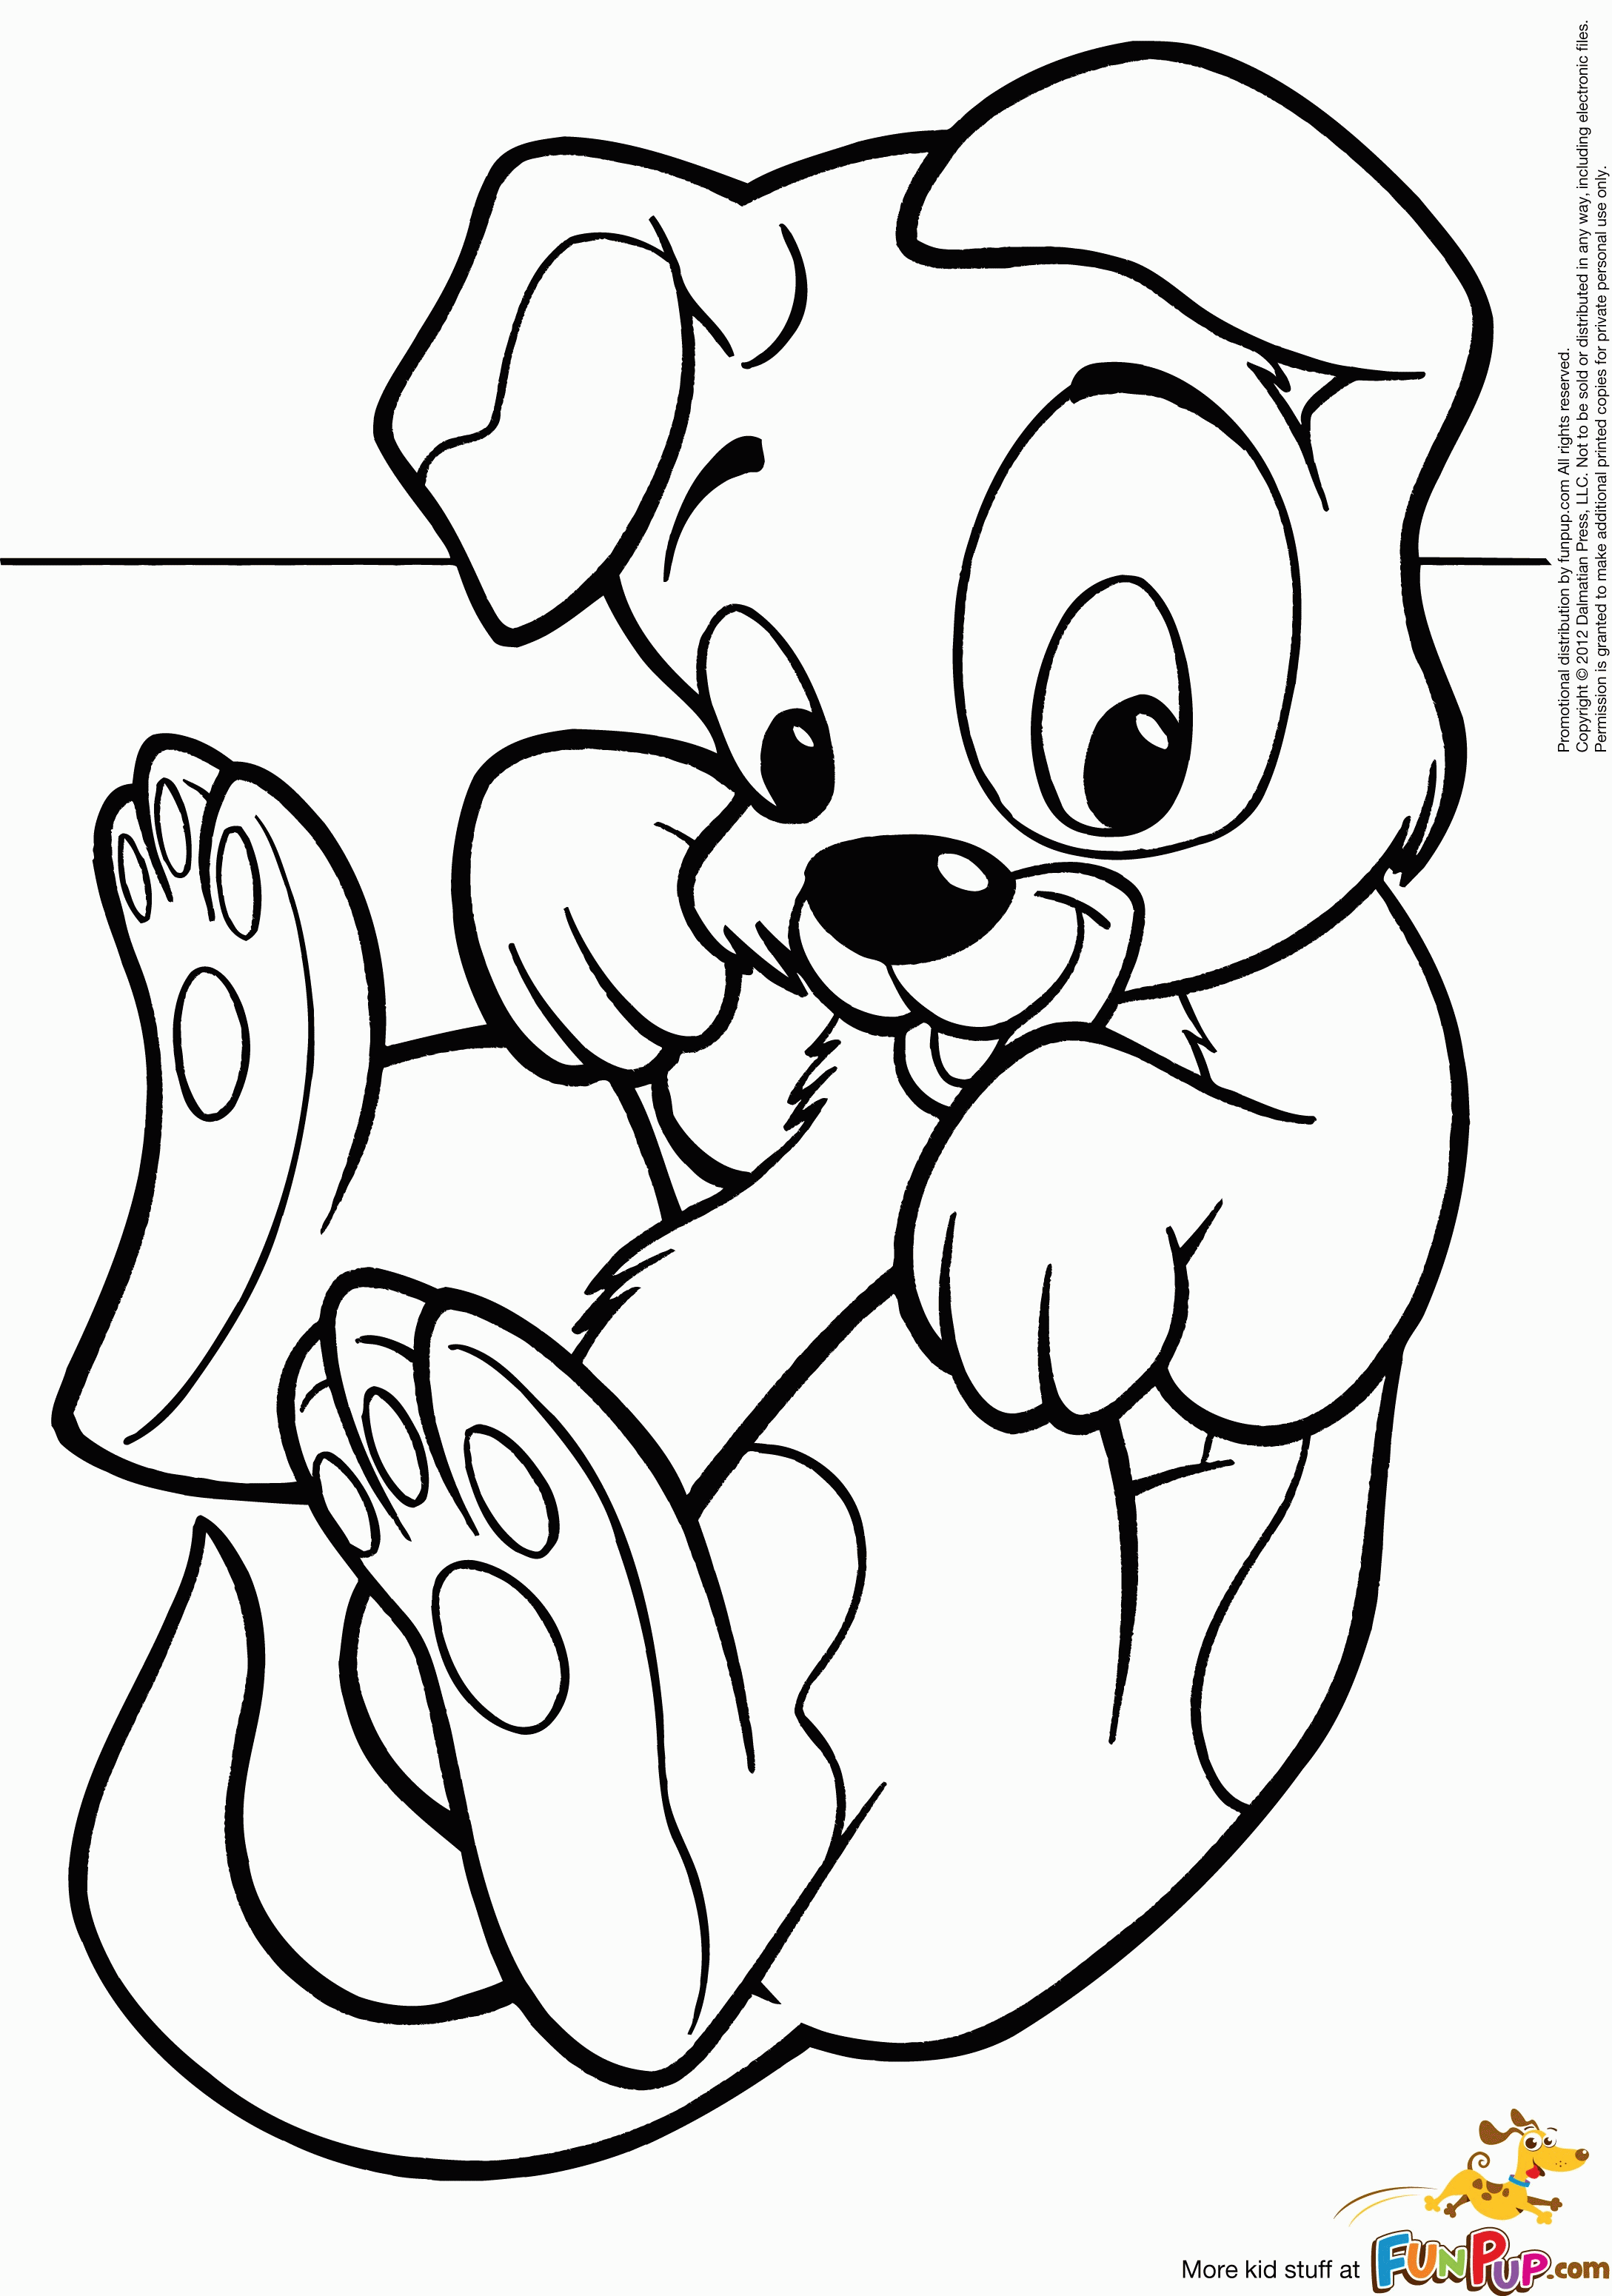 Print Out Coloring Pages Of Puppies - Coloring